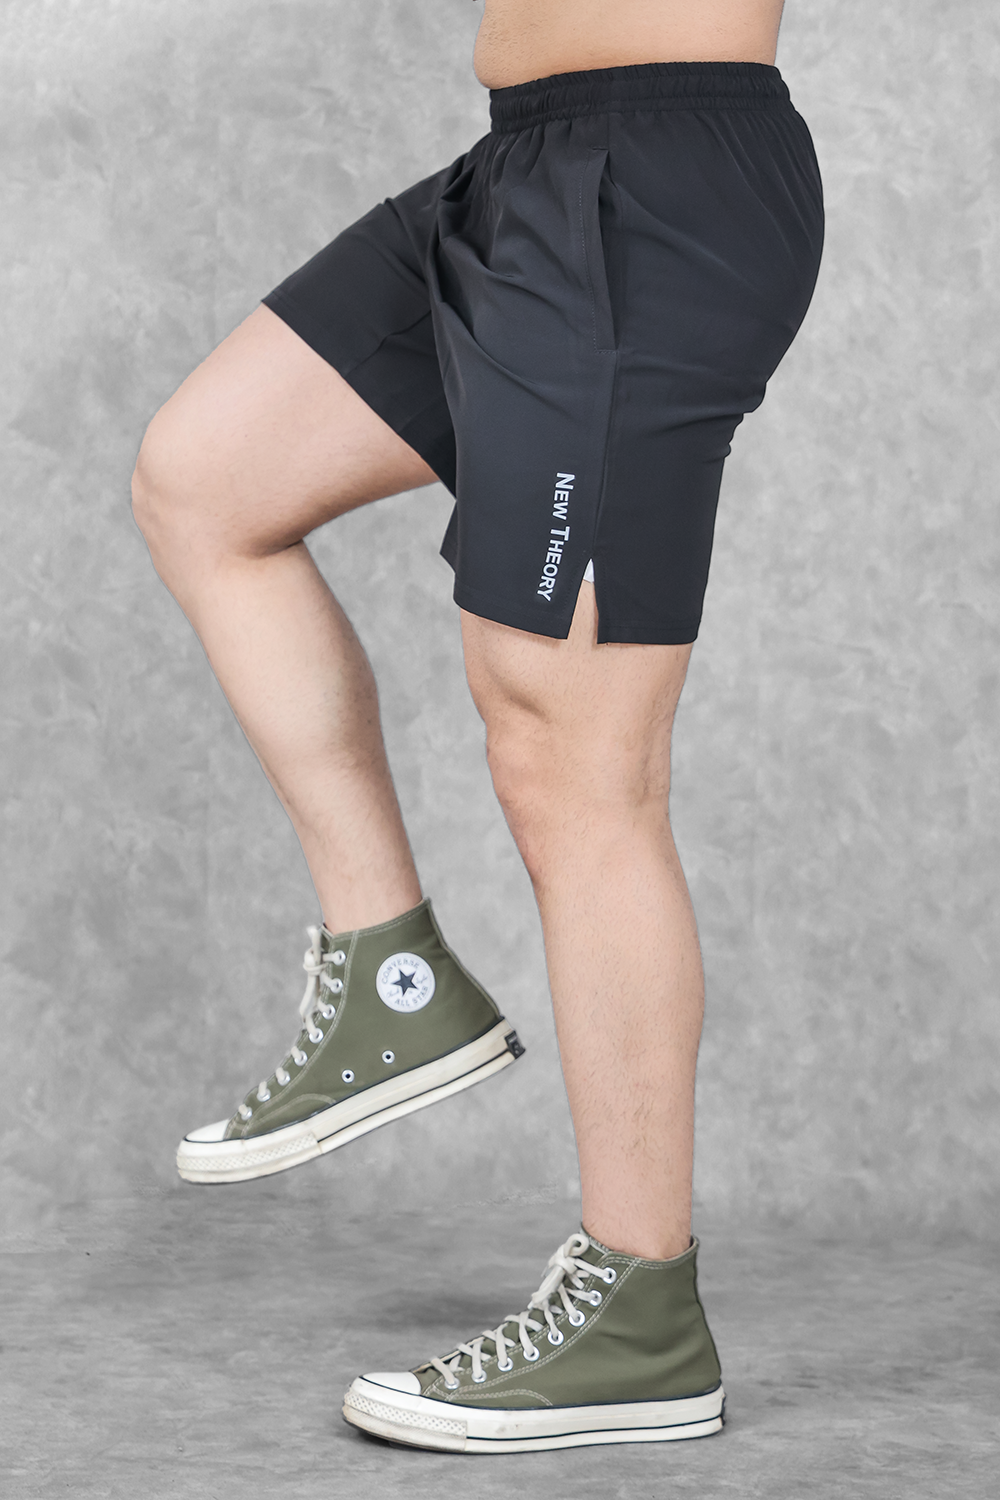 Dry-Fit Woven shorts- Black